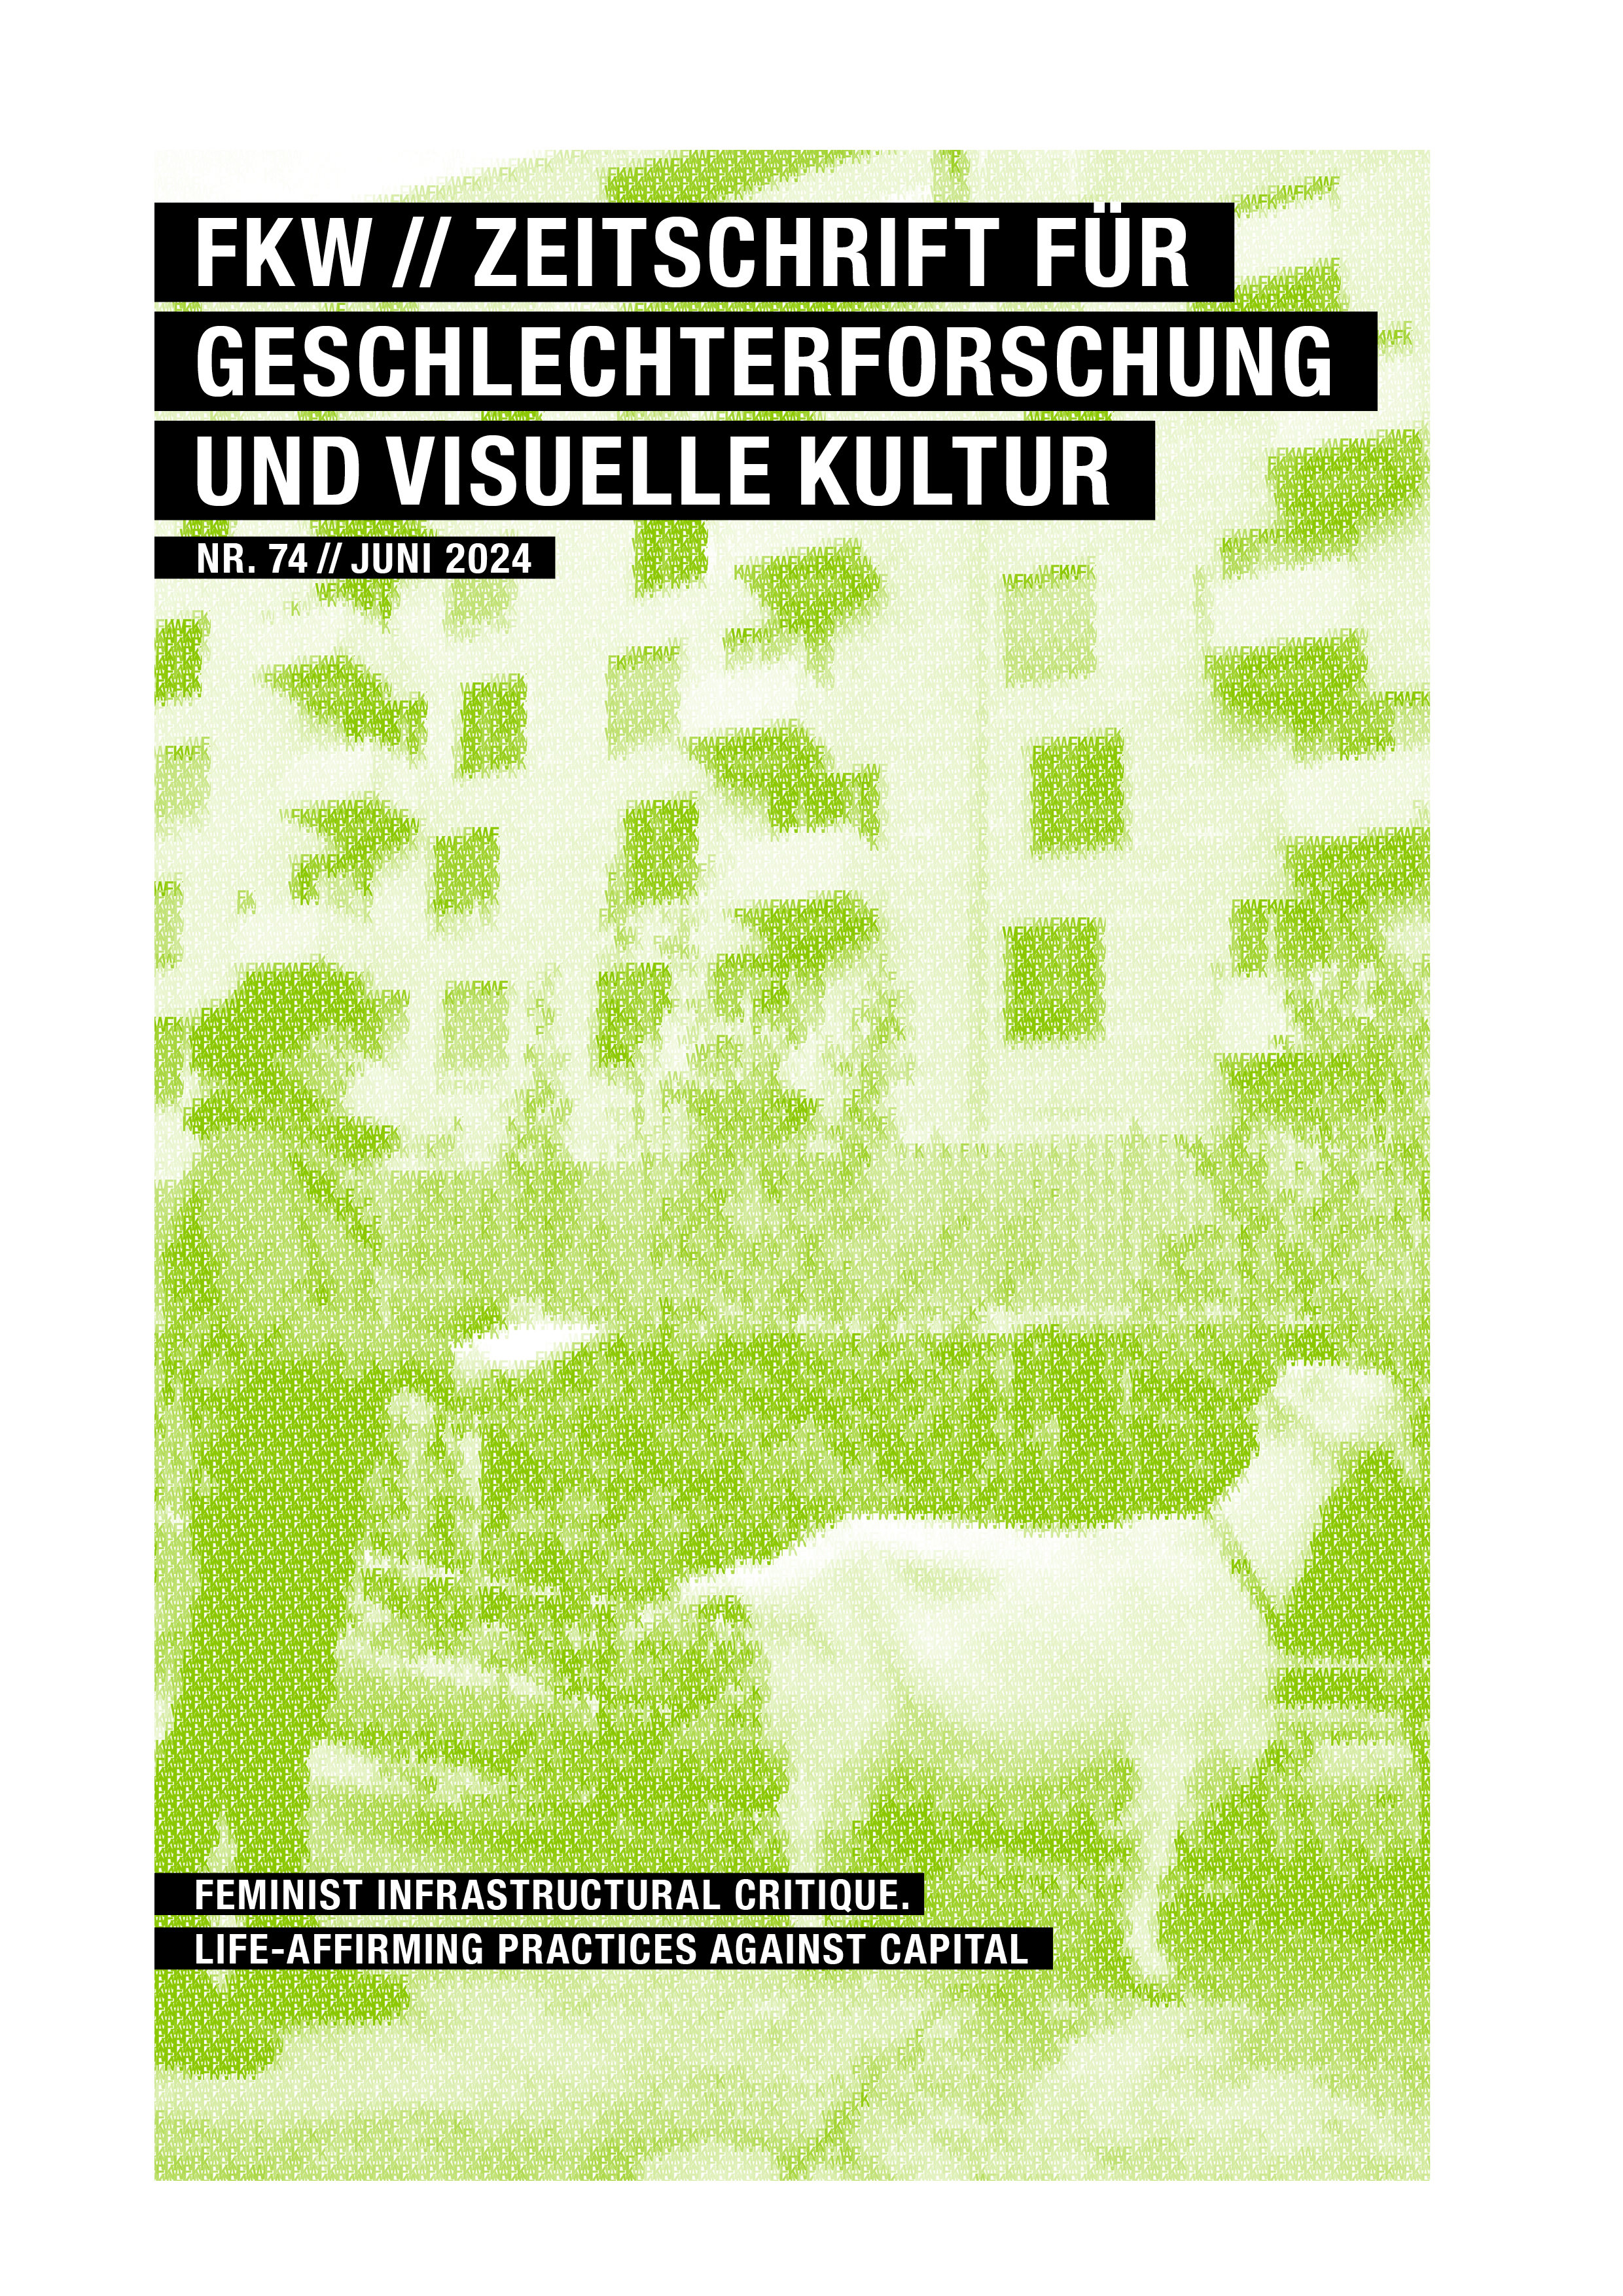 					Ansehen Nr. 74 (2024): FEMINIST INFRASTRUCTURAL CRITIQUE. LIFE-AFFIRMING PRACTICES AGAINST CAPITAL
				